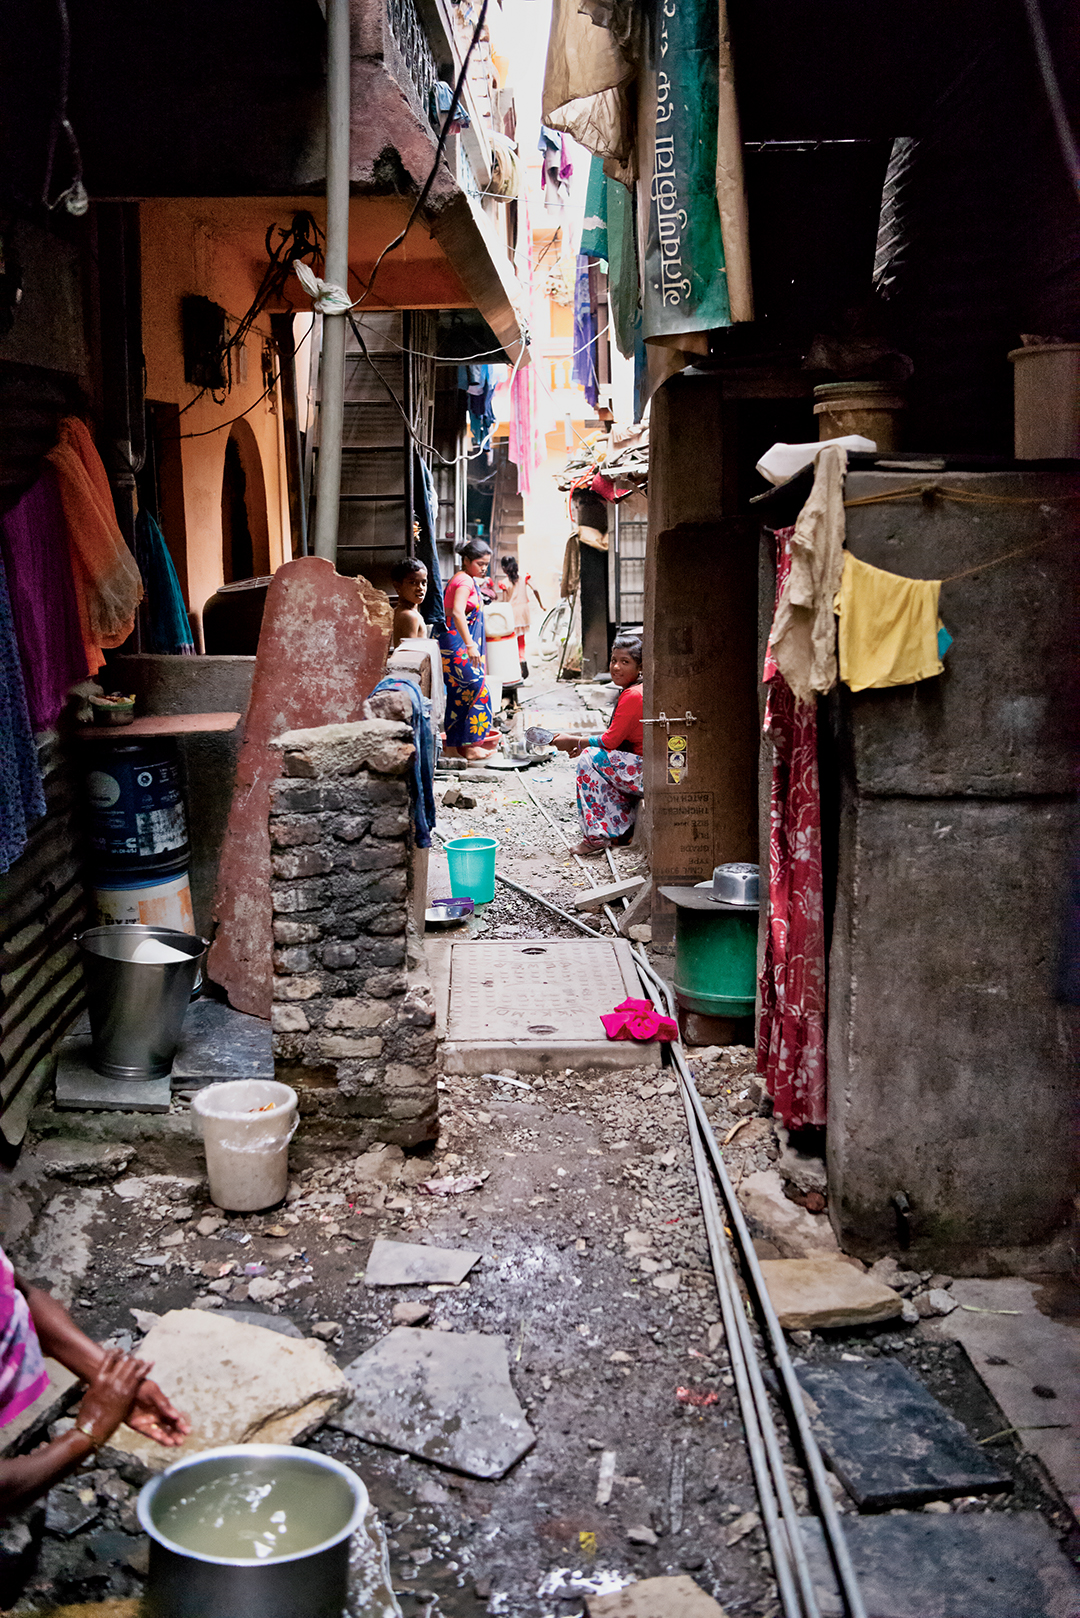 The living conditions for many children living in India.